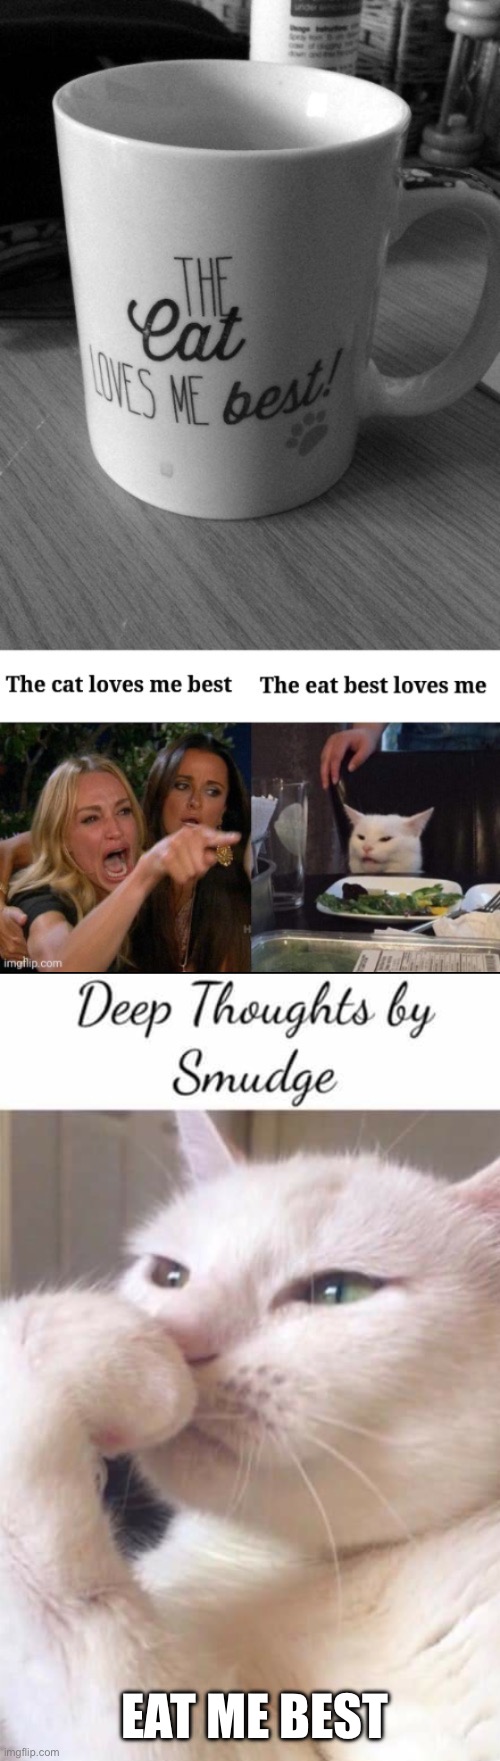 Cat eats | EAT ME BEST | image tagged in smudge,cat,eat,best | made w/ Imgflip meme maker